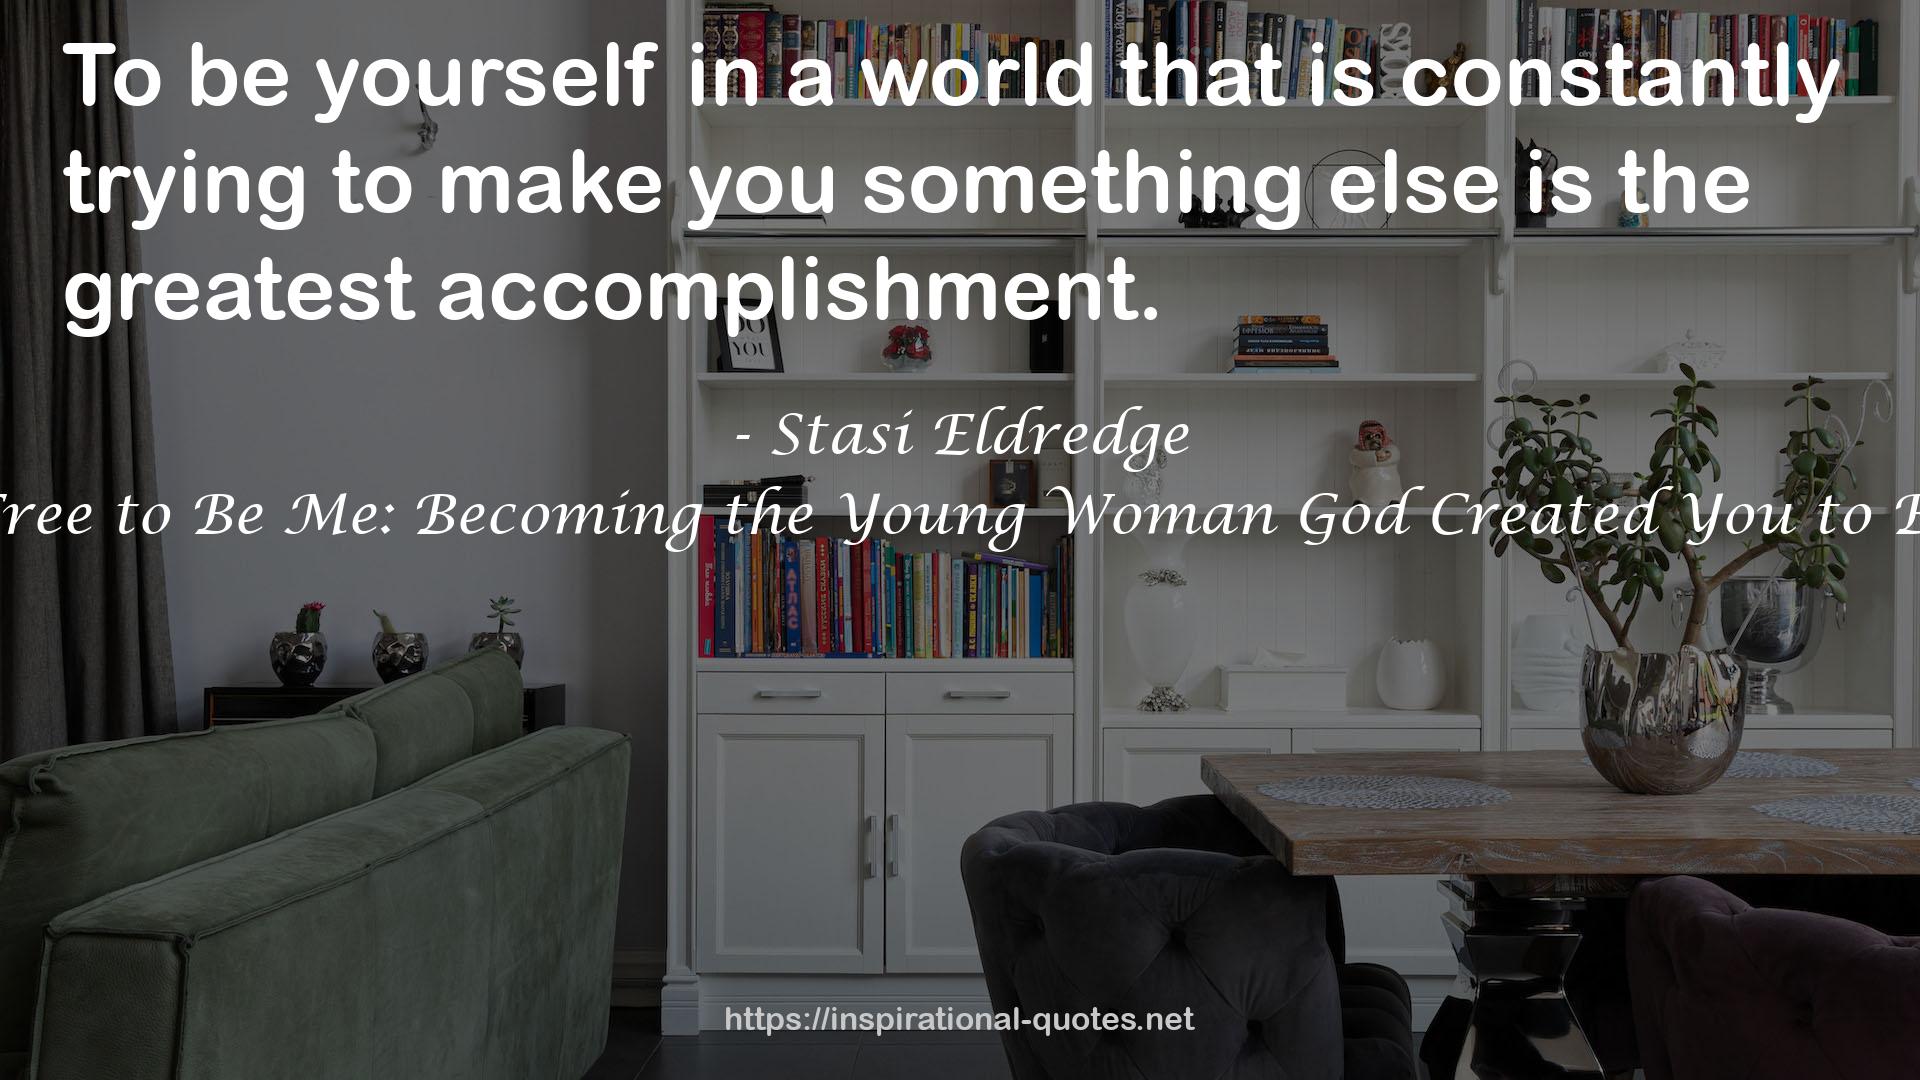 Free to Be Me: Becoming the Young Woman God Created You to Be QUOTES